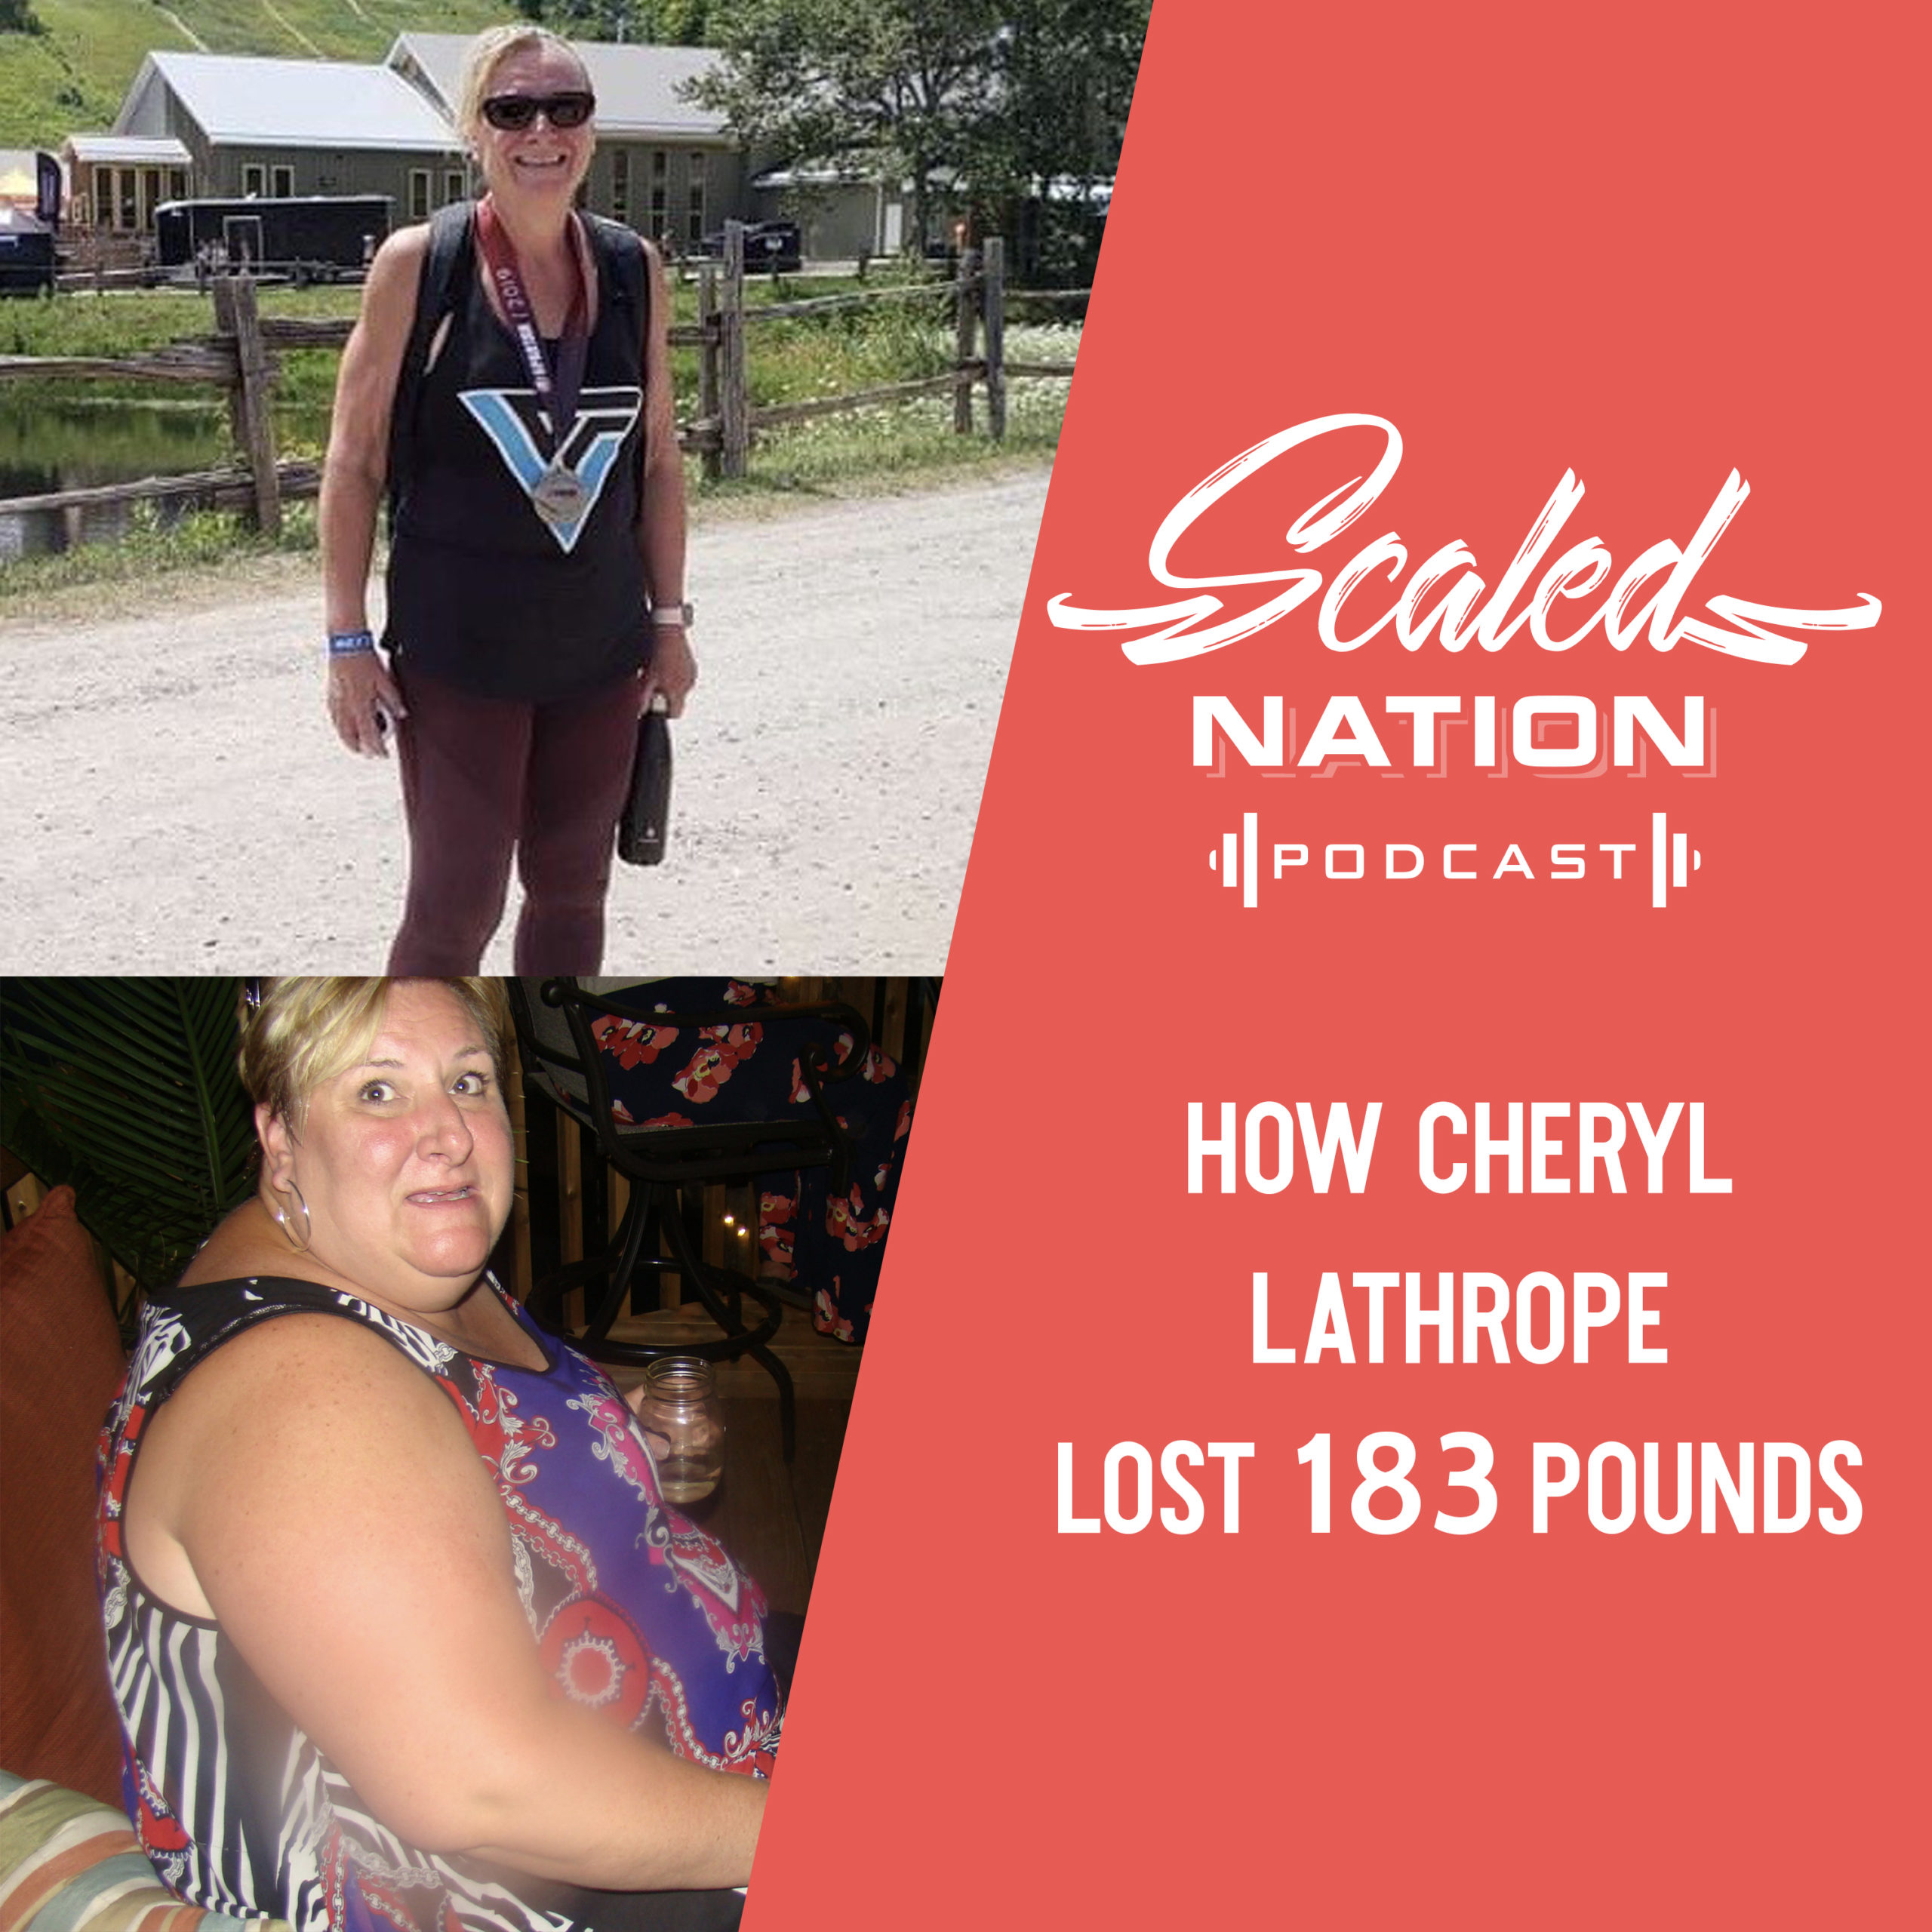 How Cheryl Lathrope Lost 183 Pounds: A CrossFit Story